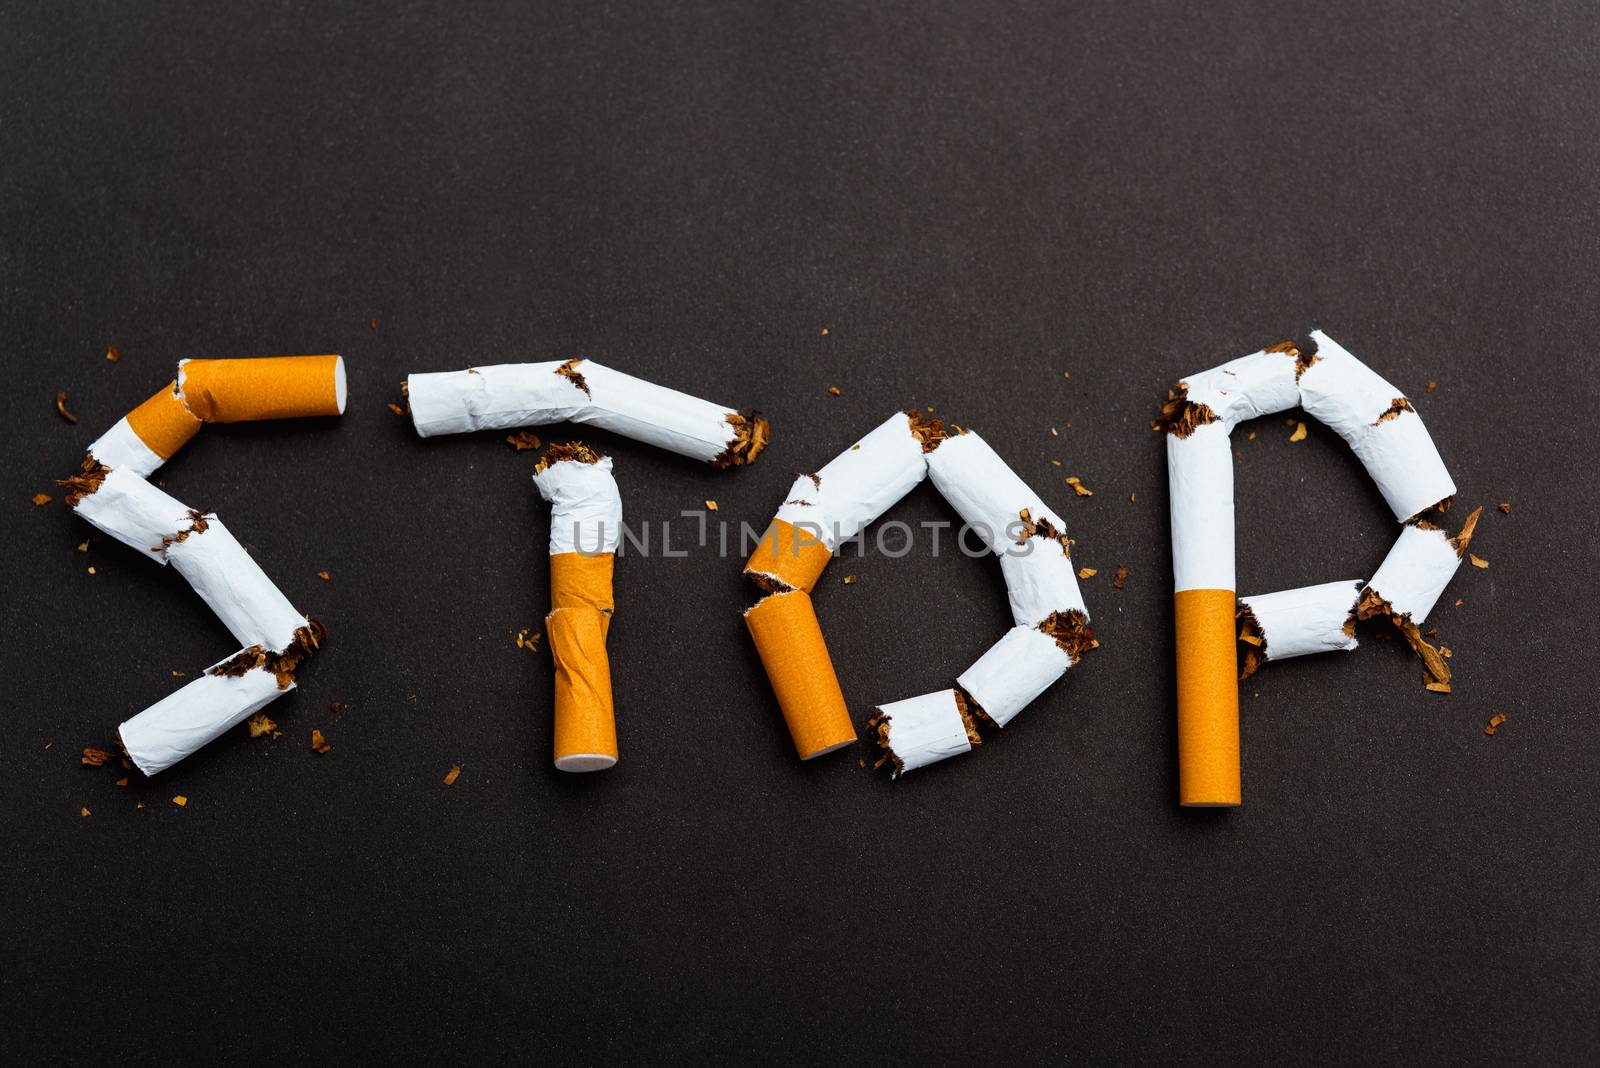 31 May of World No Tobacco Day, no smoking close up word STOP spelled text of the pile cigarette or tobacco on black background with copy space, and Warning lung health concept